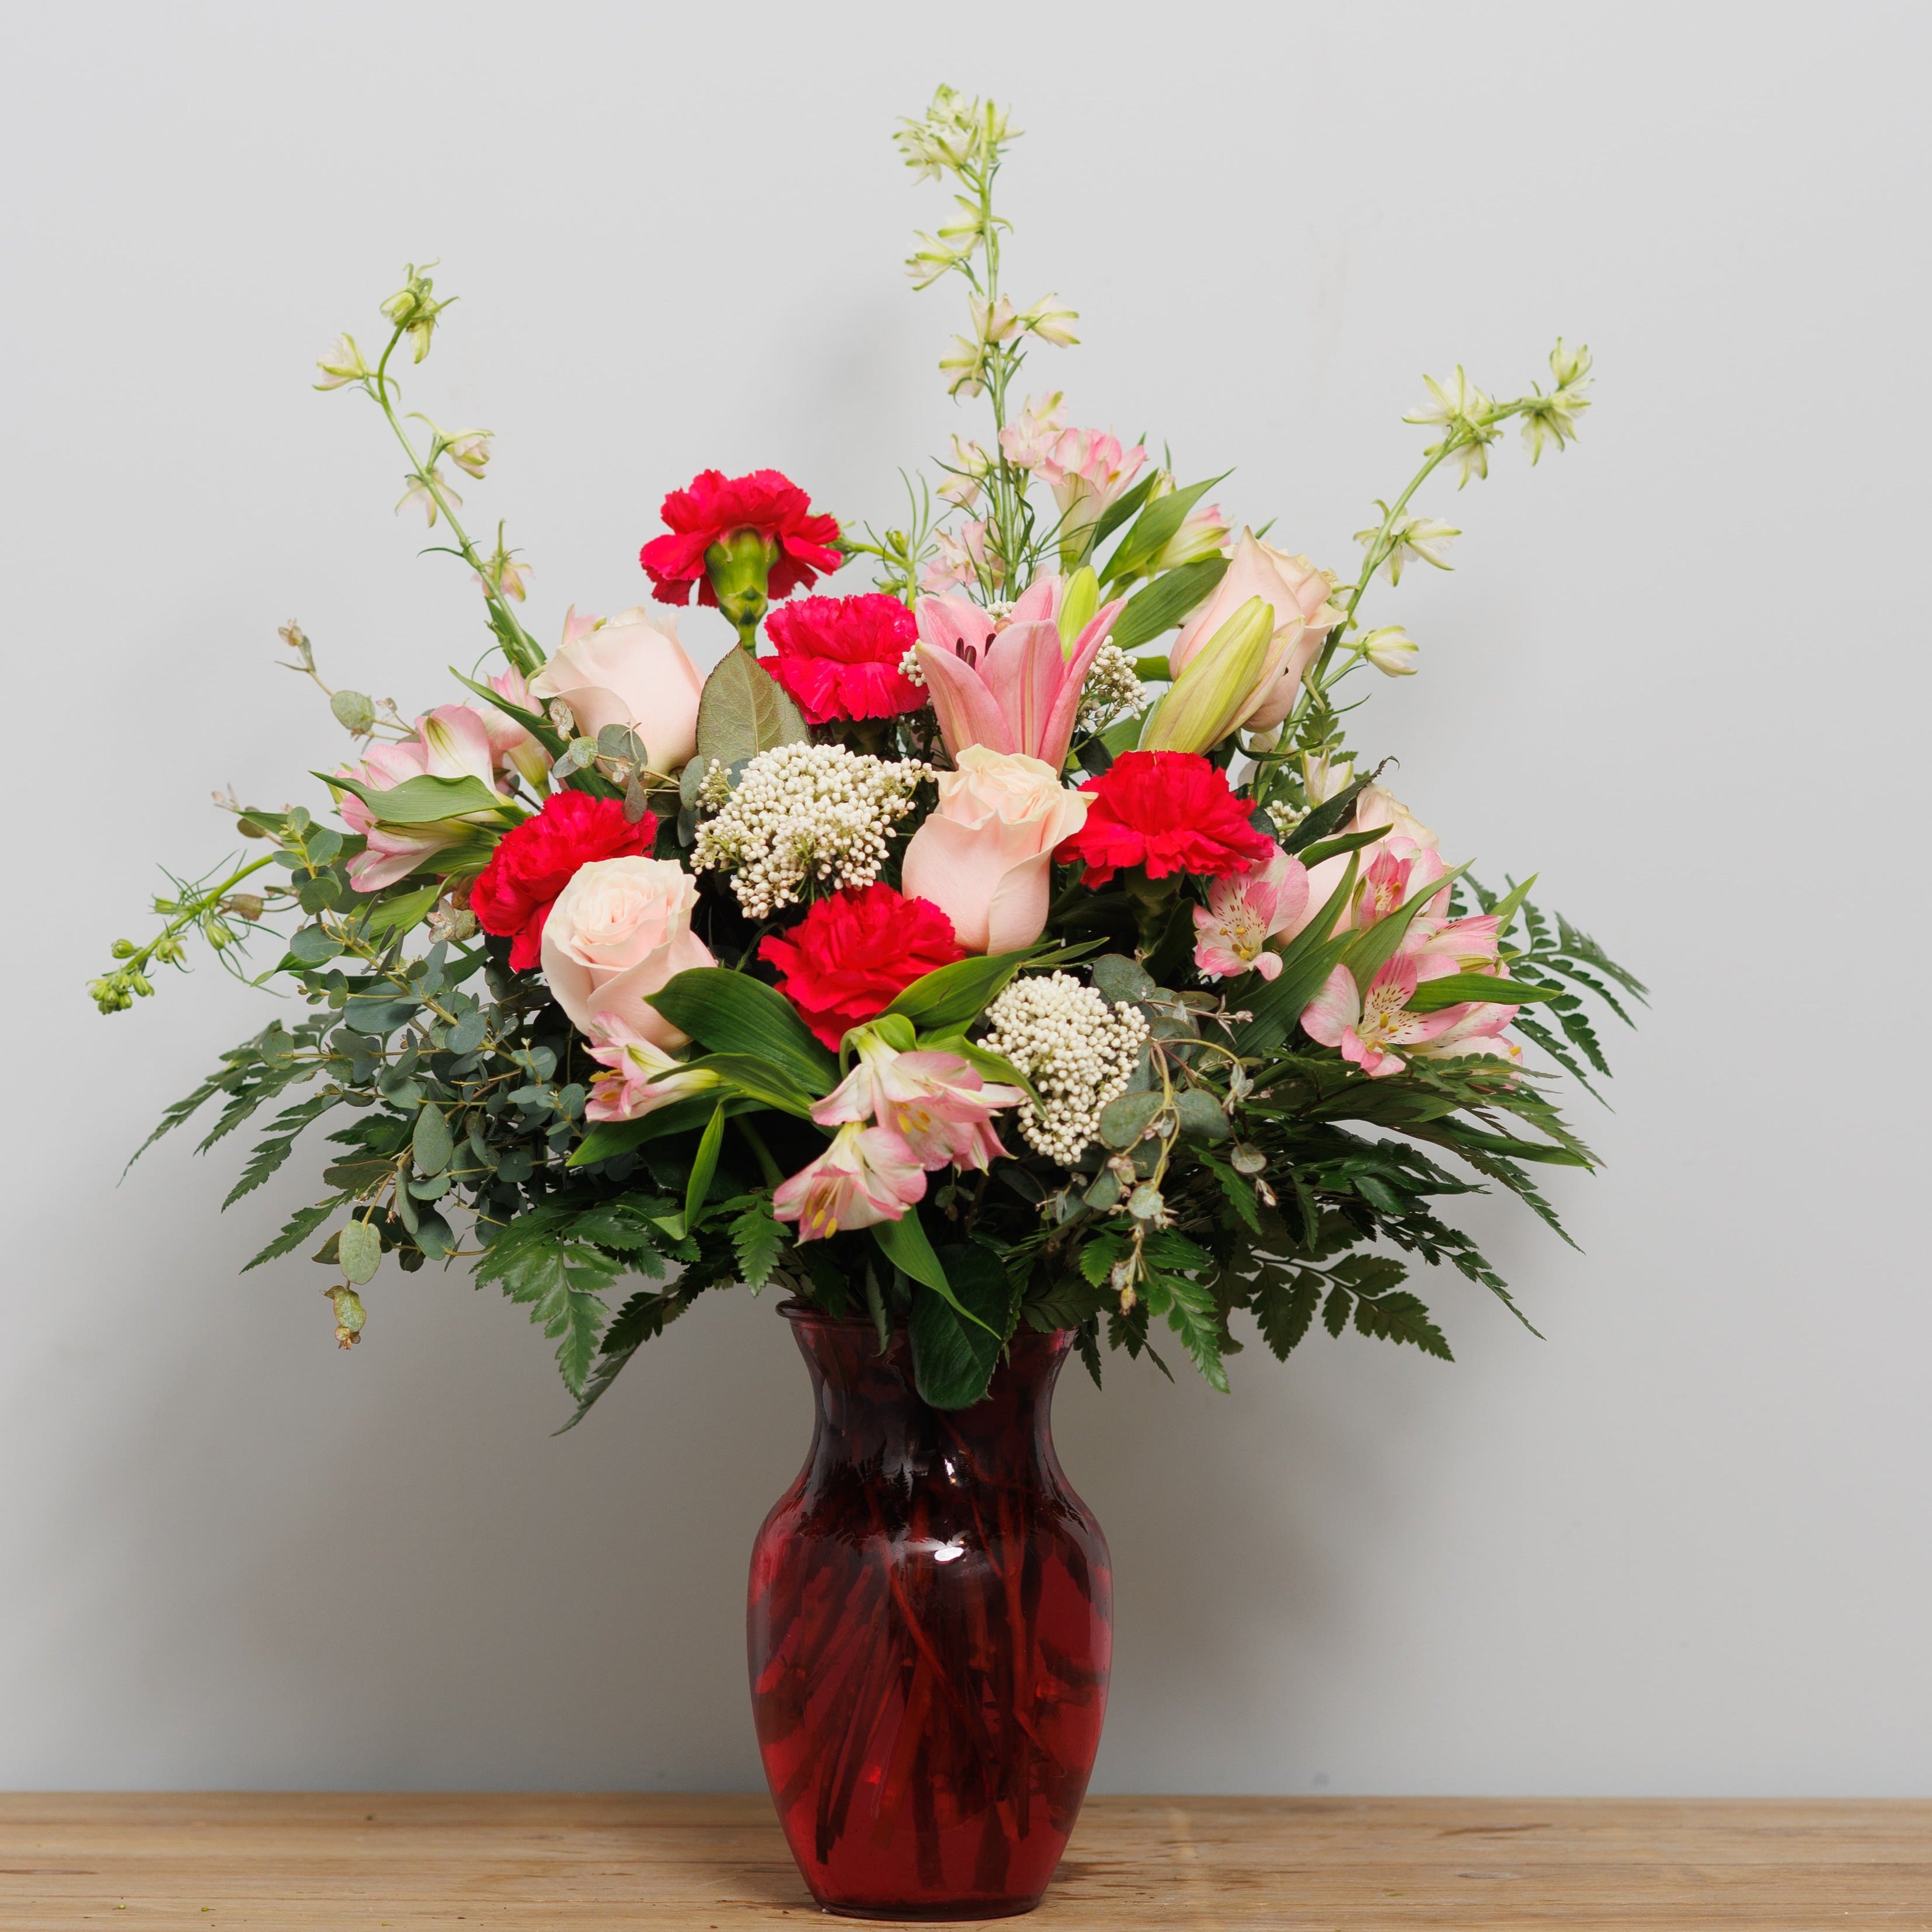 Pink and white flowers in a deep pink vase.